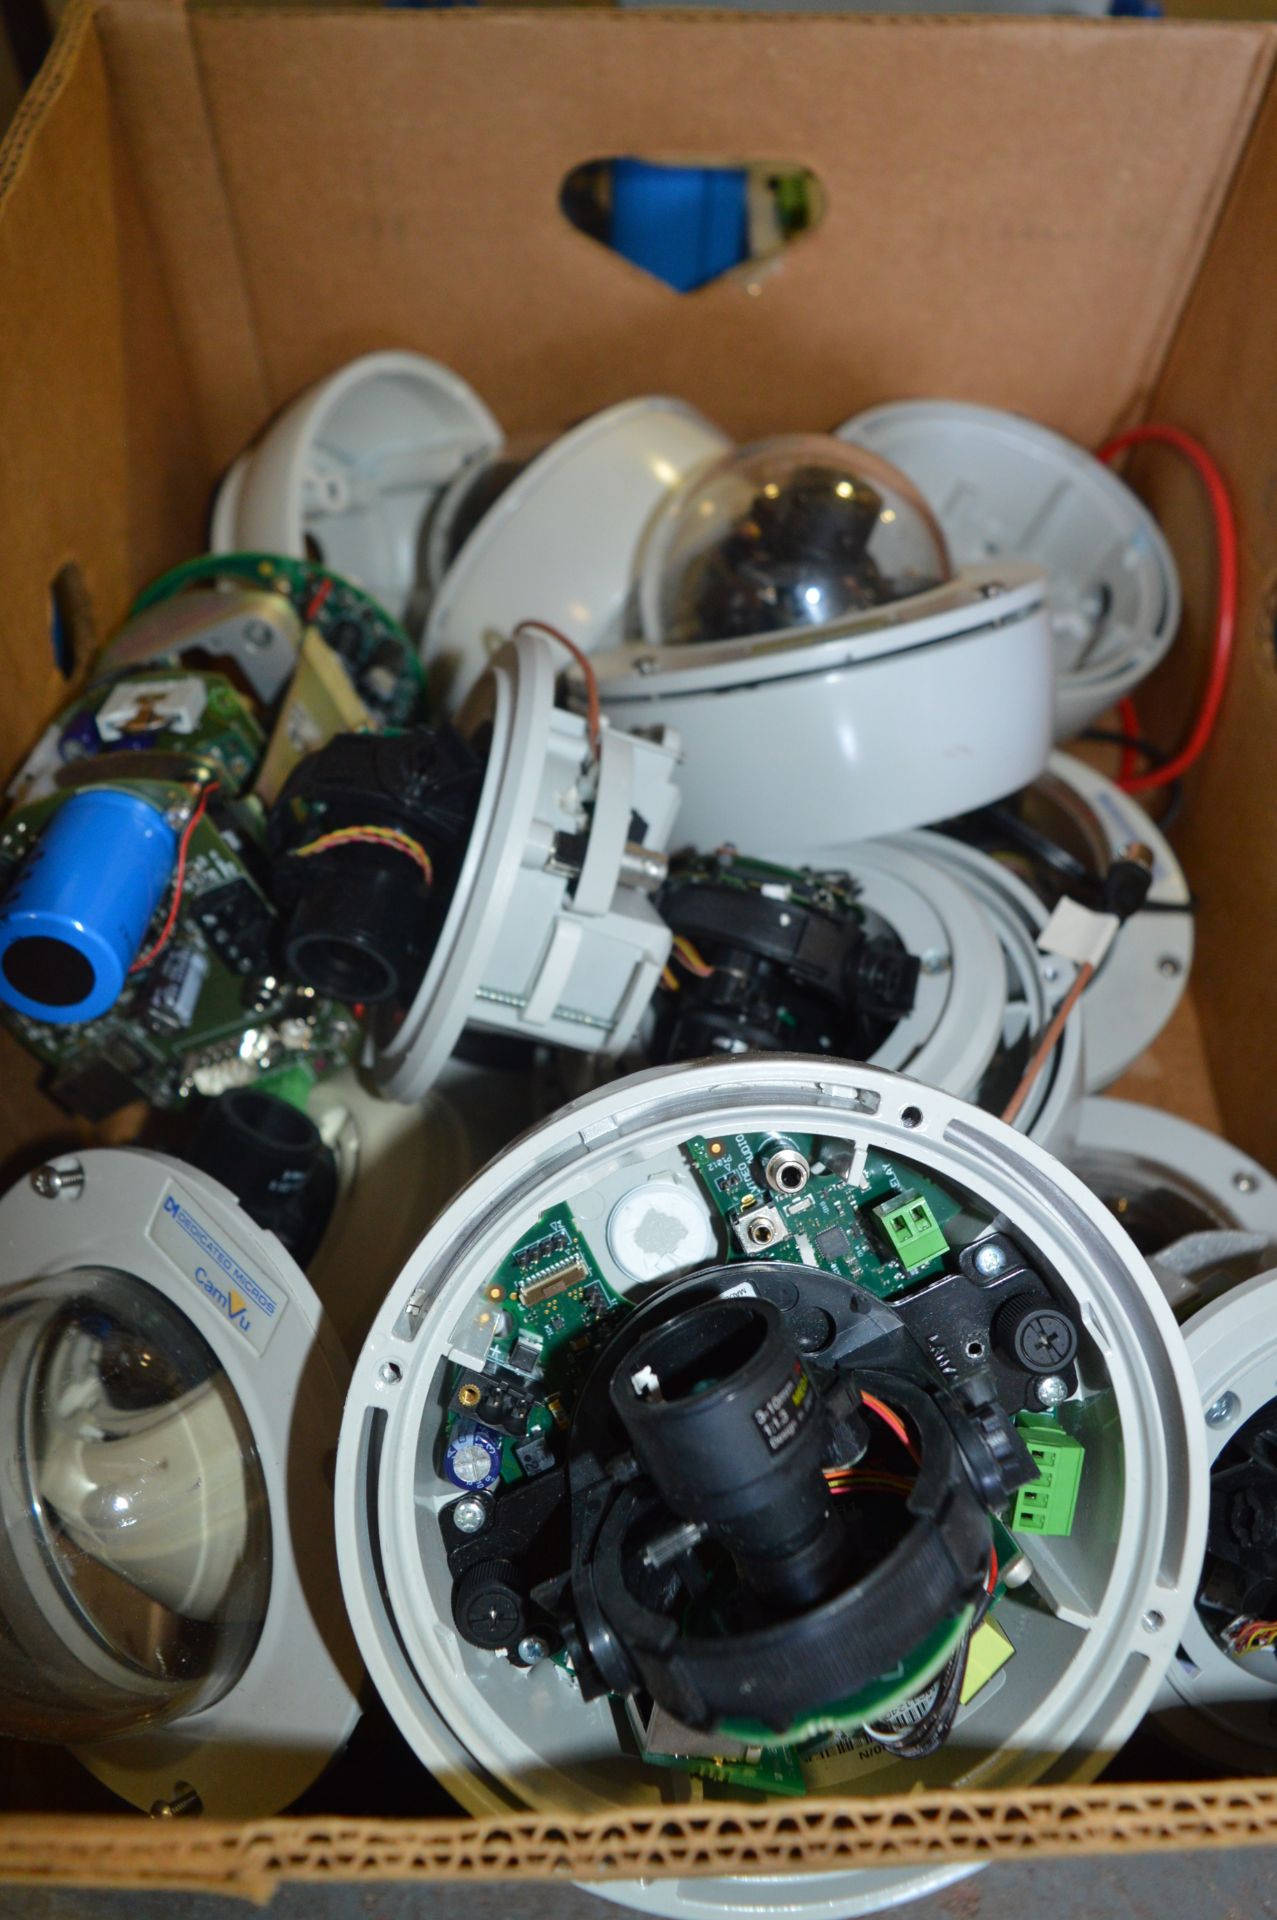 *Box Containing CCTV Dome Cameras with Cases